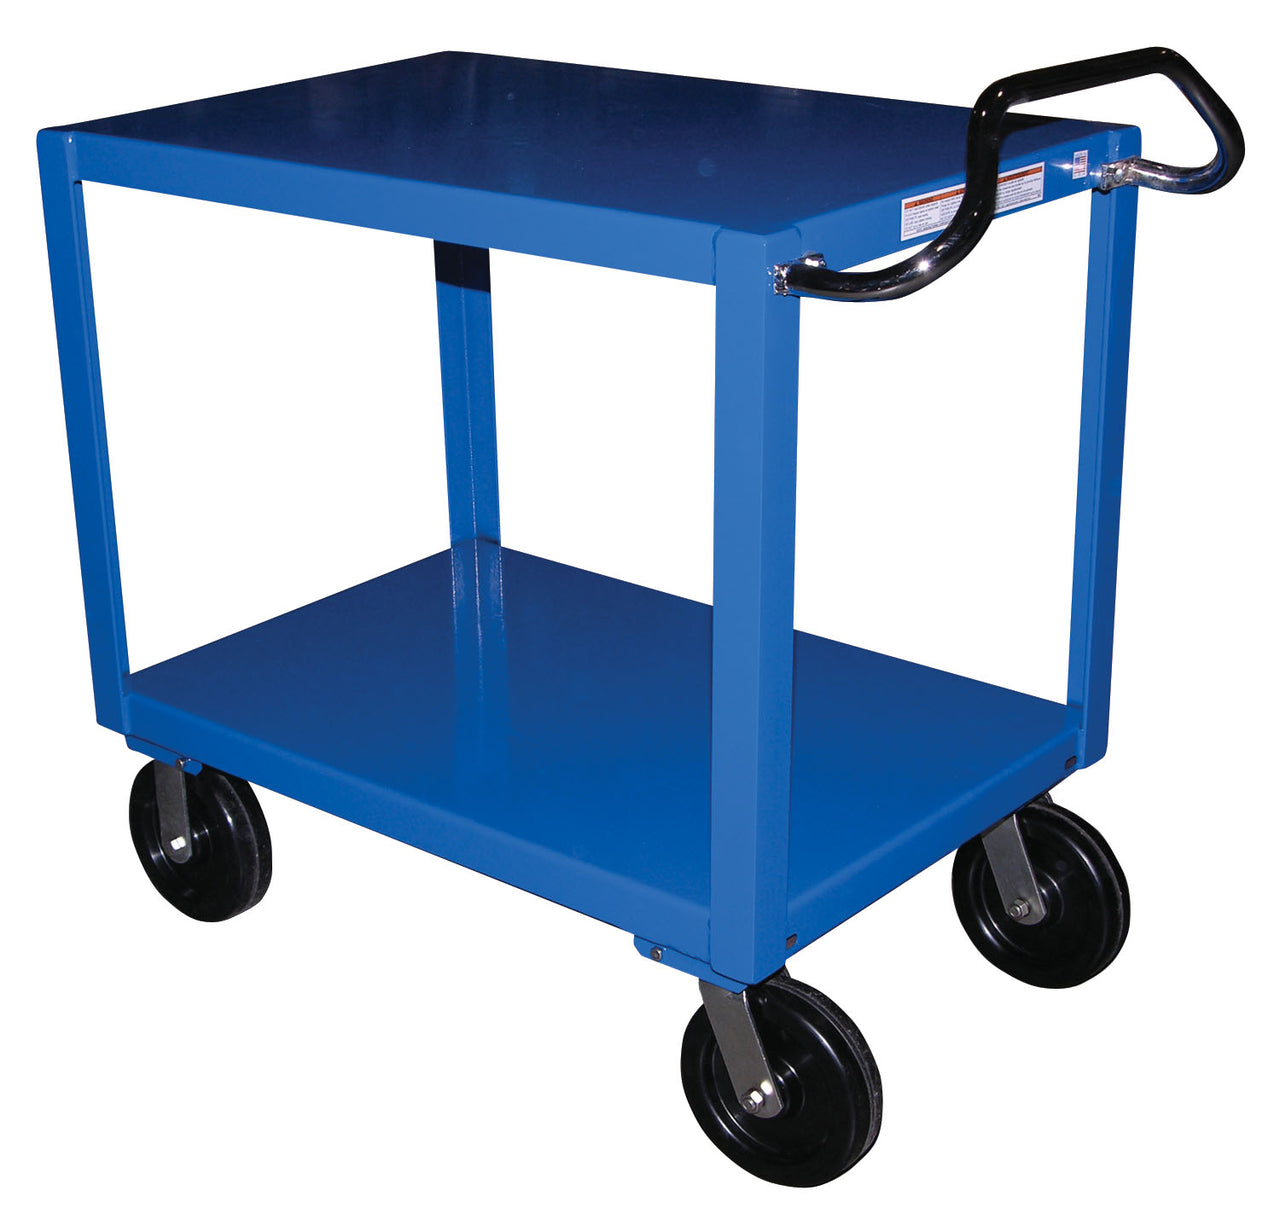 30" x 60" Ergo-Handle Cart w/ Mold-on-Rubber Casters